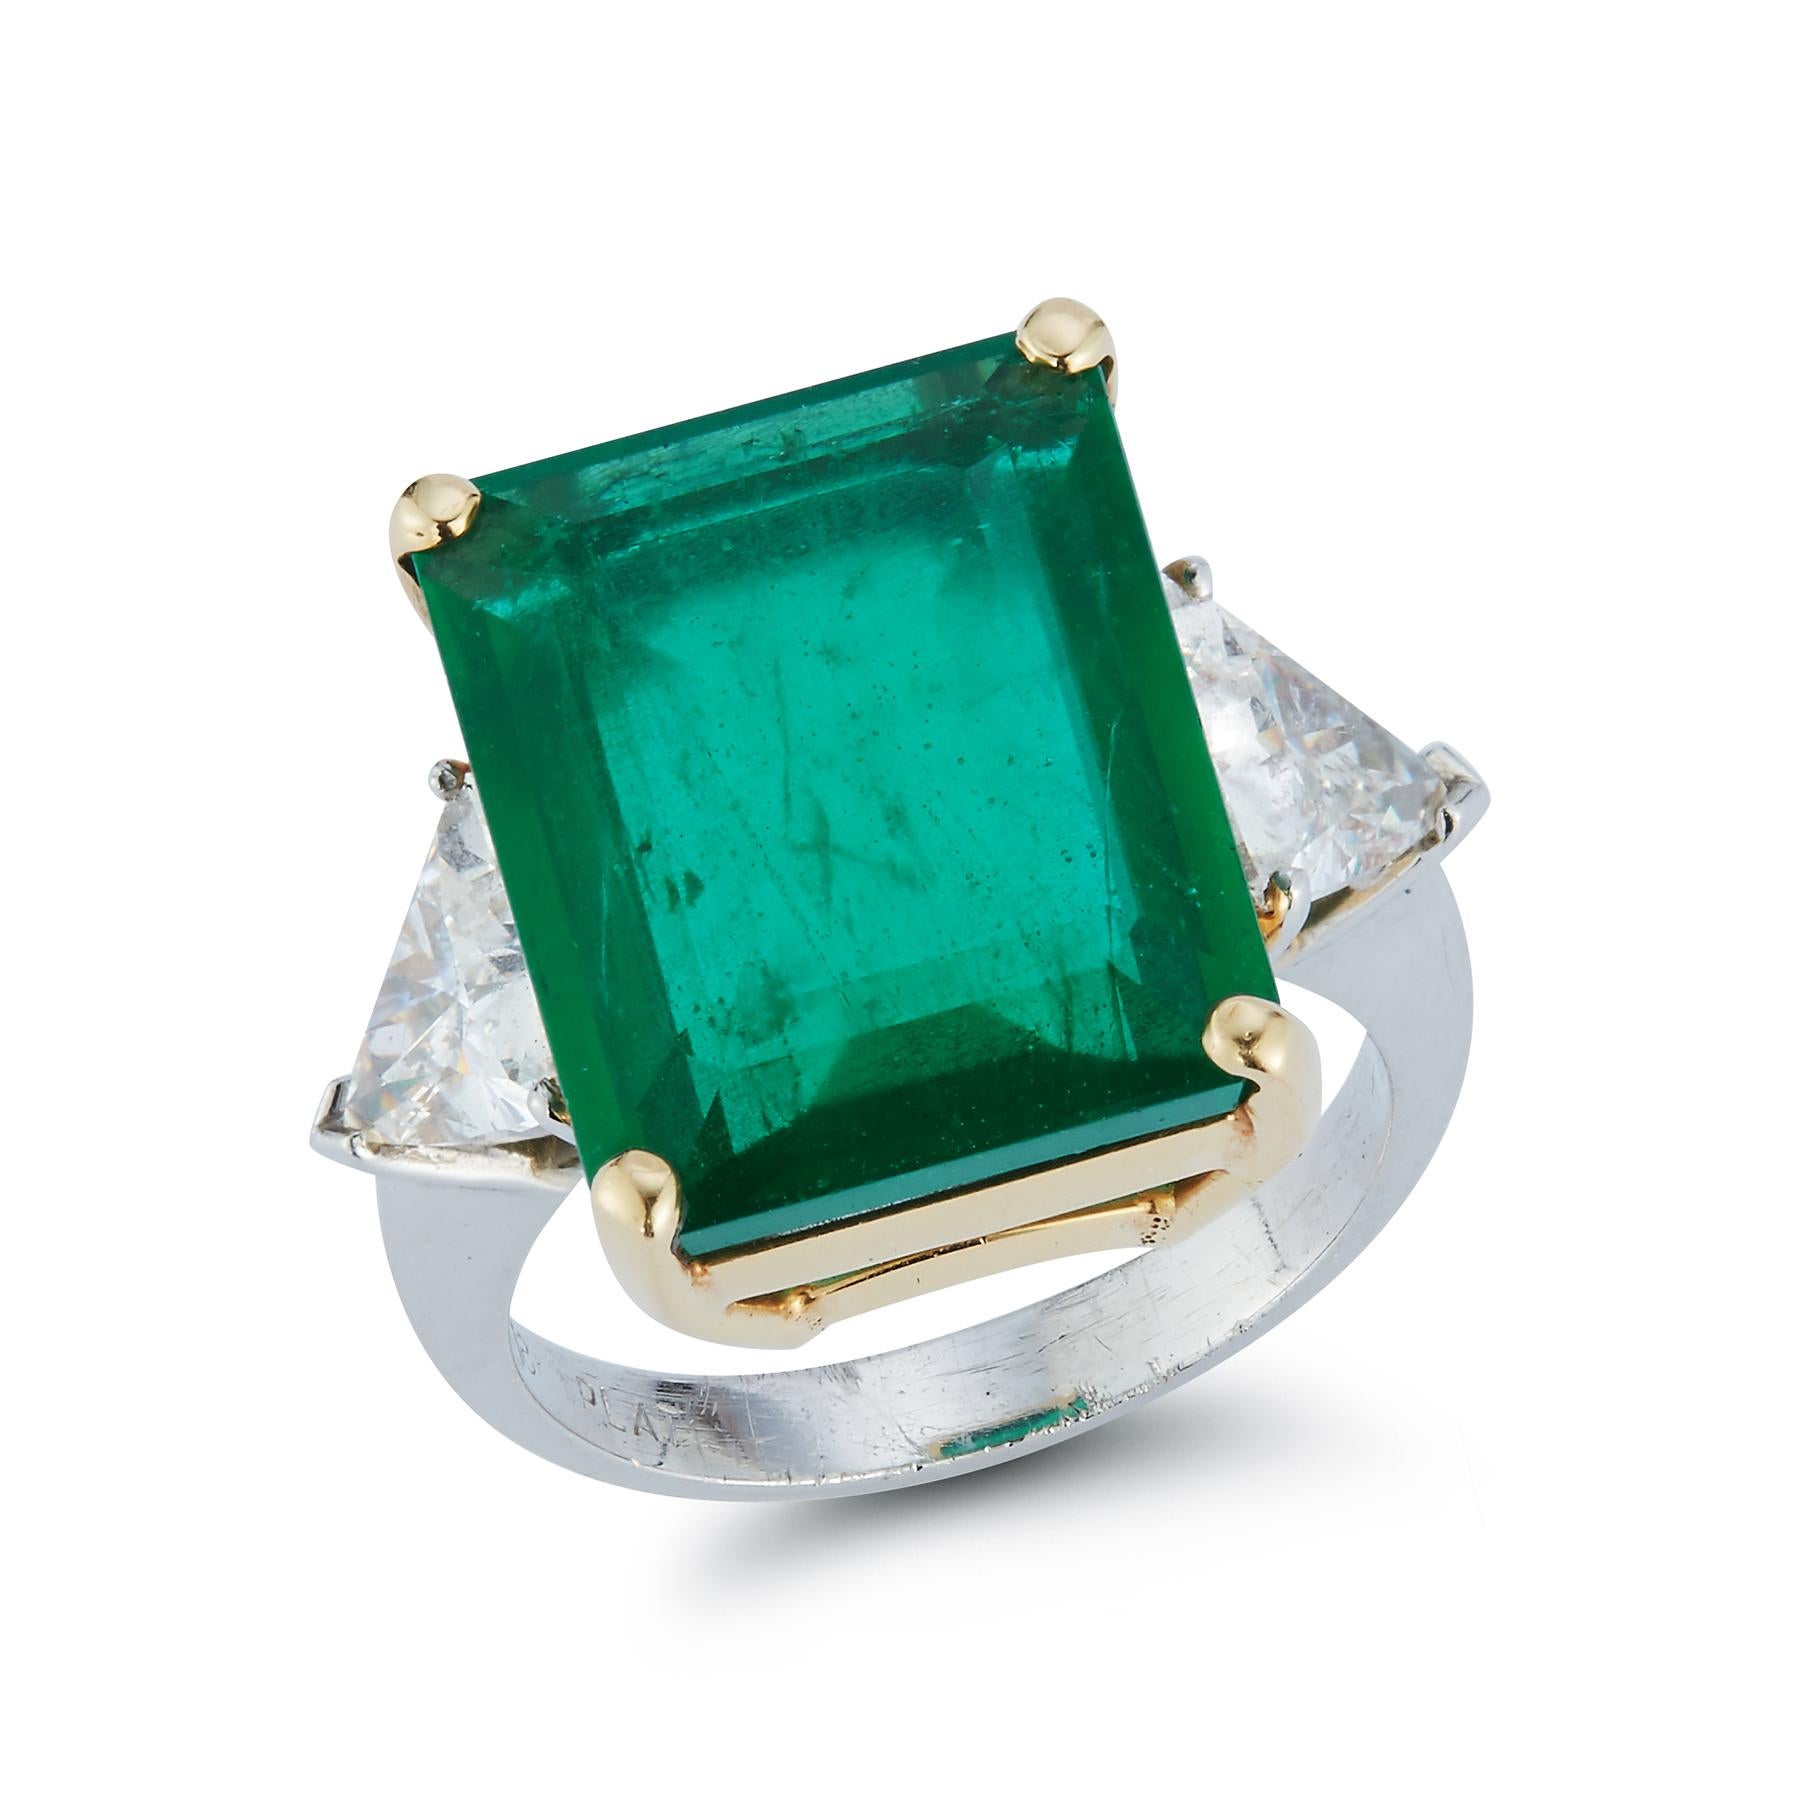 Certified Emerald & Diamond Three-Stone Ring

Platinum and 18K Gold ring with 1 Emerald cut Emerald, 11.12 cts and 2 side triangular diamonds, 1.55 cts

Certified by AGL laboratory

Ring Size 6

Resizable Free of Charge